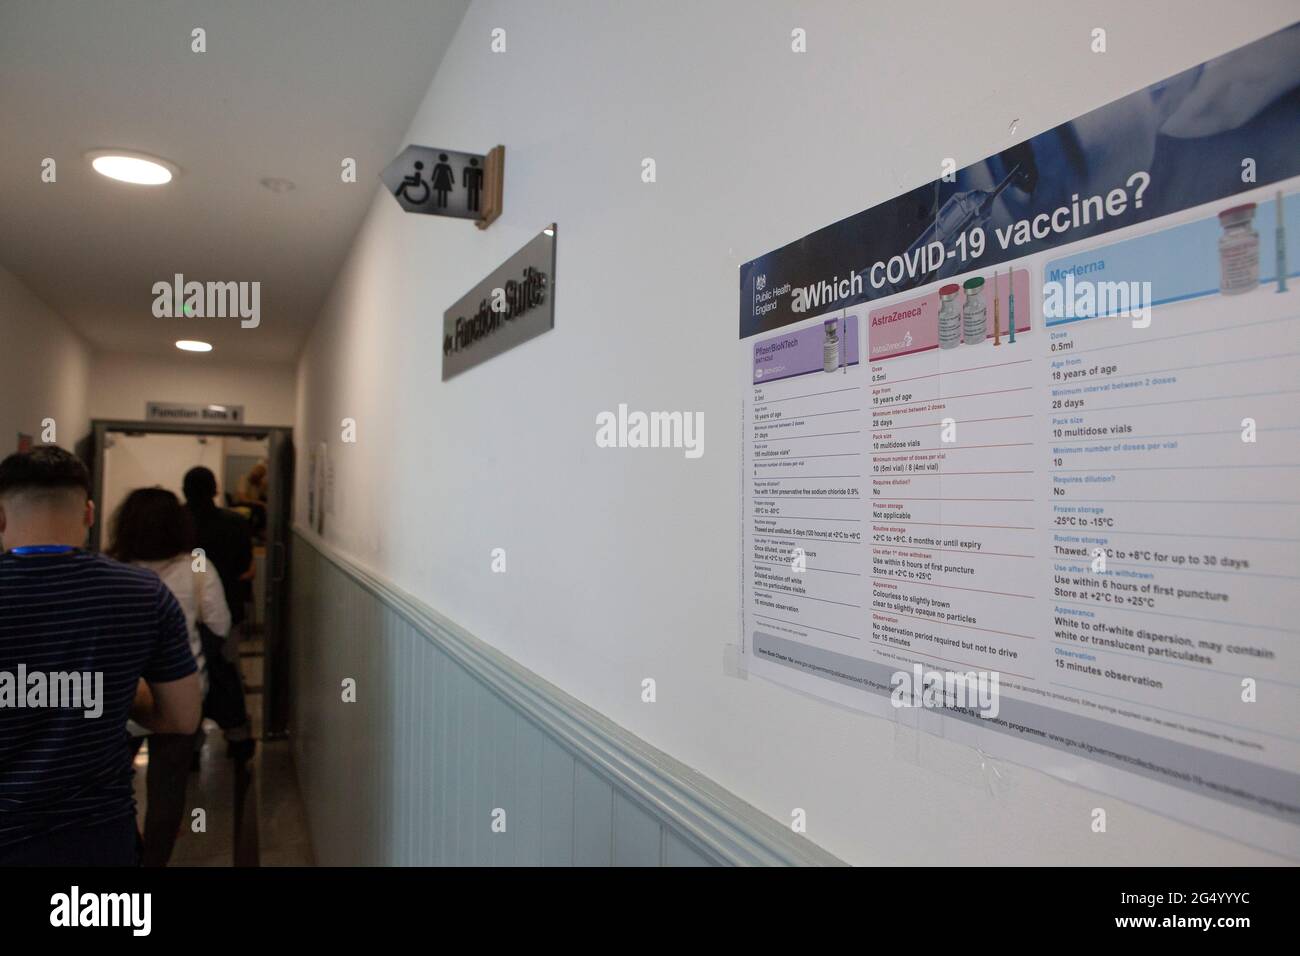 London, UK, 24 June 2021: At a vaccine centre in Tooting, a poster explains the differences bwetwwen the AstraZeneca, Modrena and Pfizer jabs. It is hoped that a rapid vaccine roll-out can mitigate the spread of the Delta Variant. Anna Watson/Alamy Live News Stock Photo